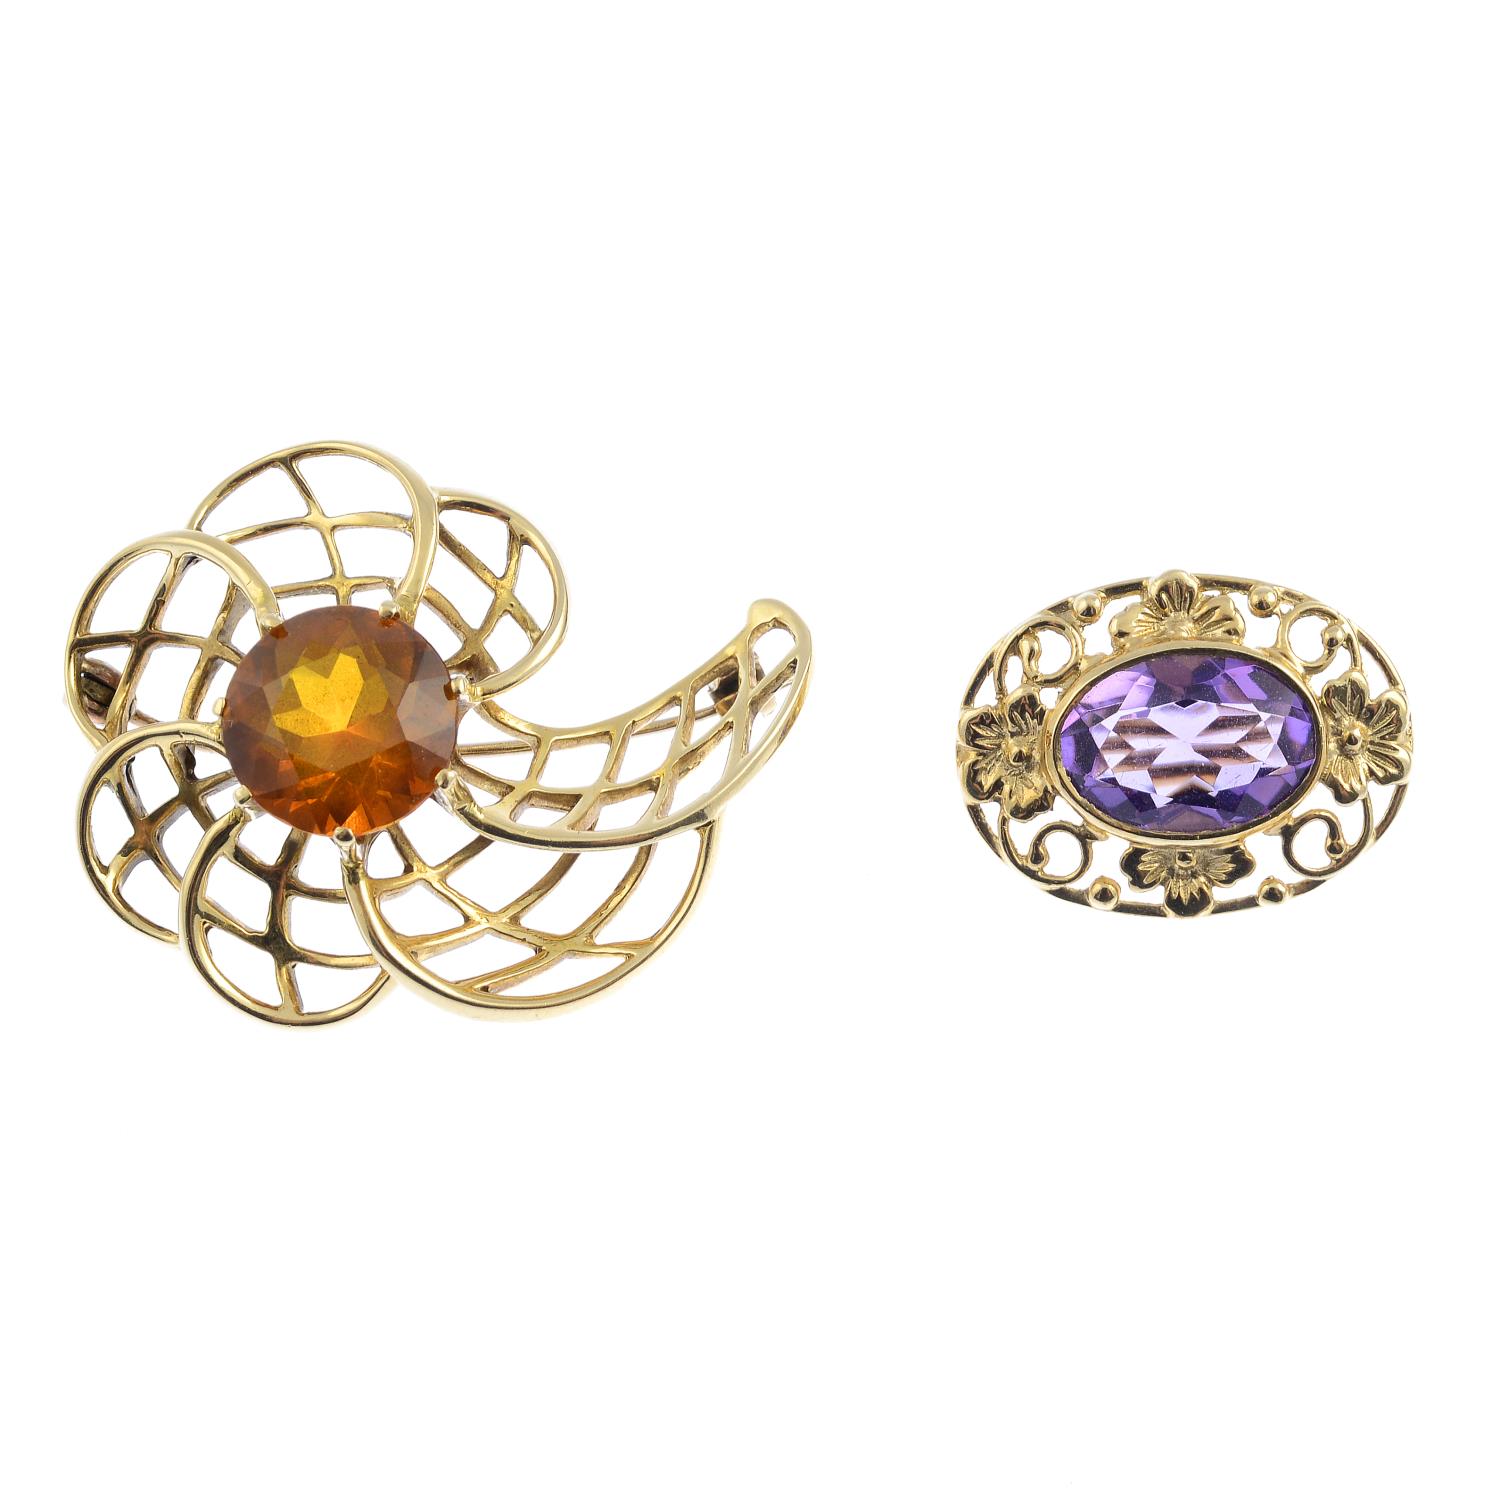 Two 9ct gold gem-set brooches. Each of openwork design, the first designed as a stylised flower with